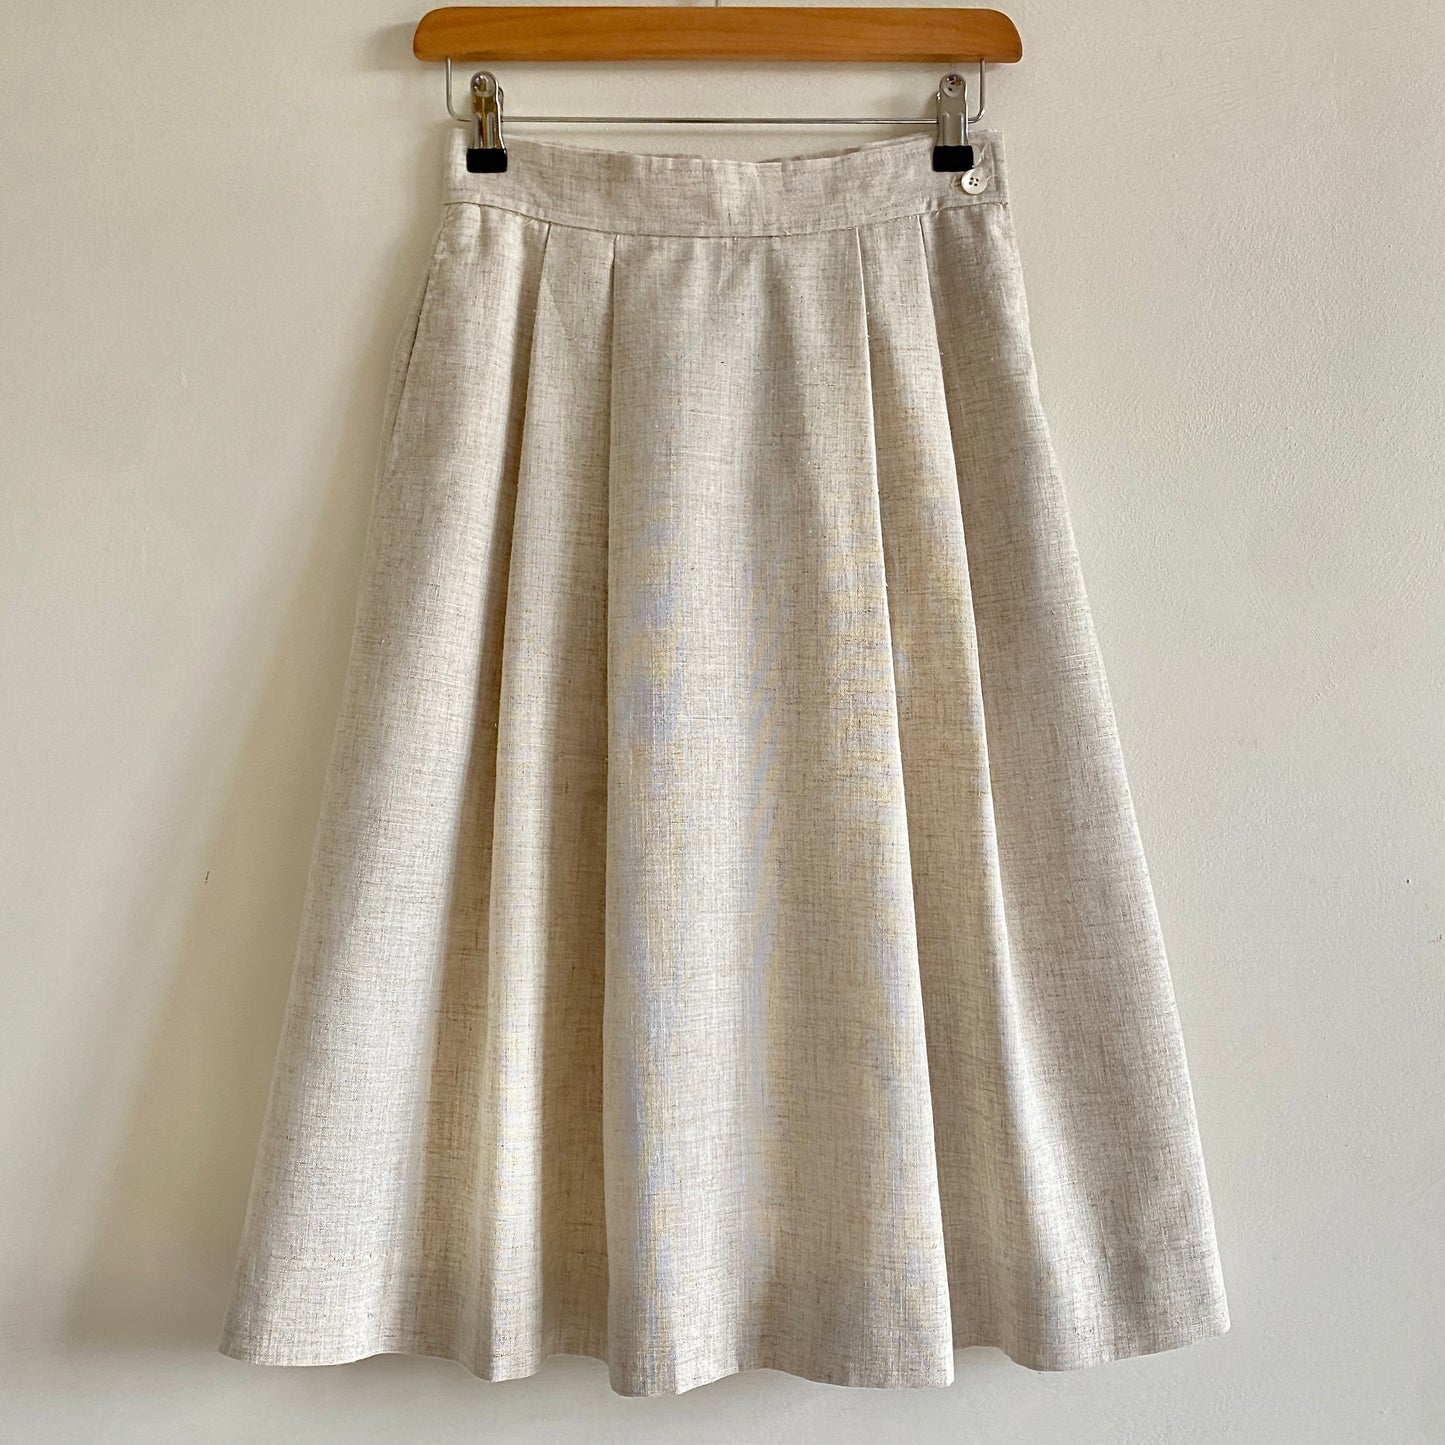 80s linen look vintage skirt Midi length 27" Side button fastening Pleated waistband Deep pockets to front Waist measures 26"